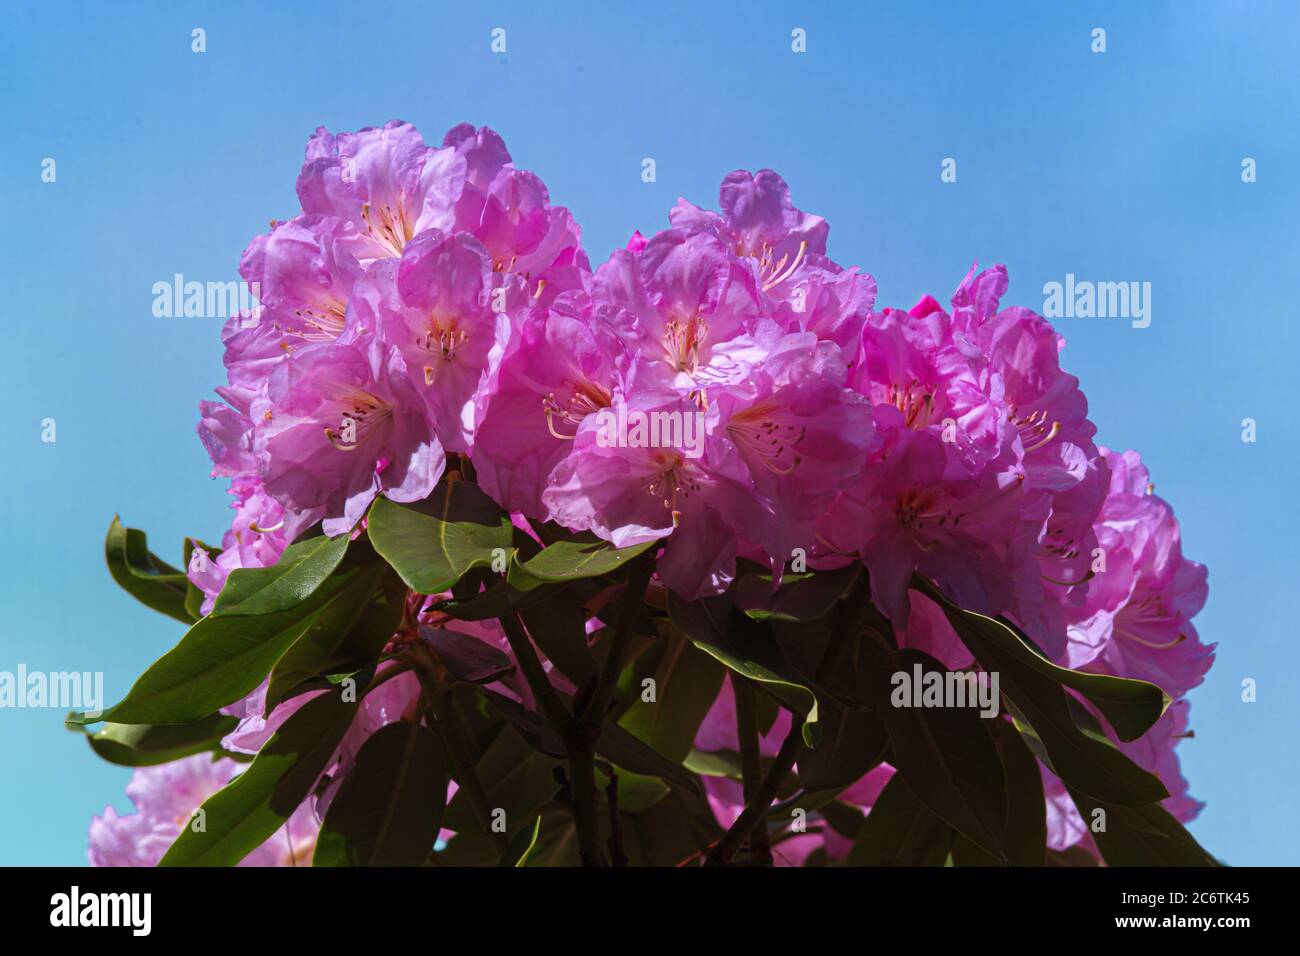 Catawba Rhododendron Cultivar (Rhododendron catawbiense) Stock Photo